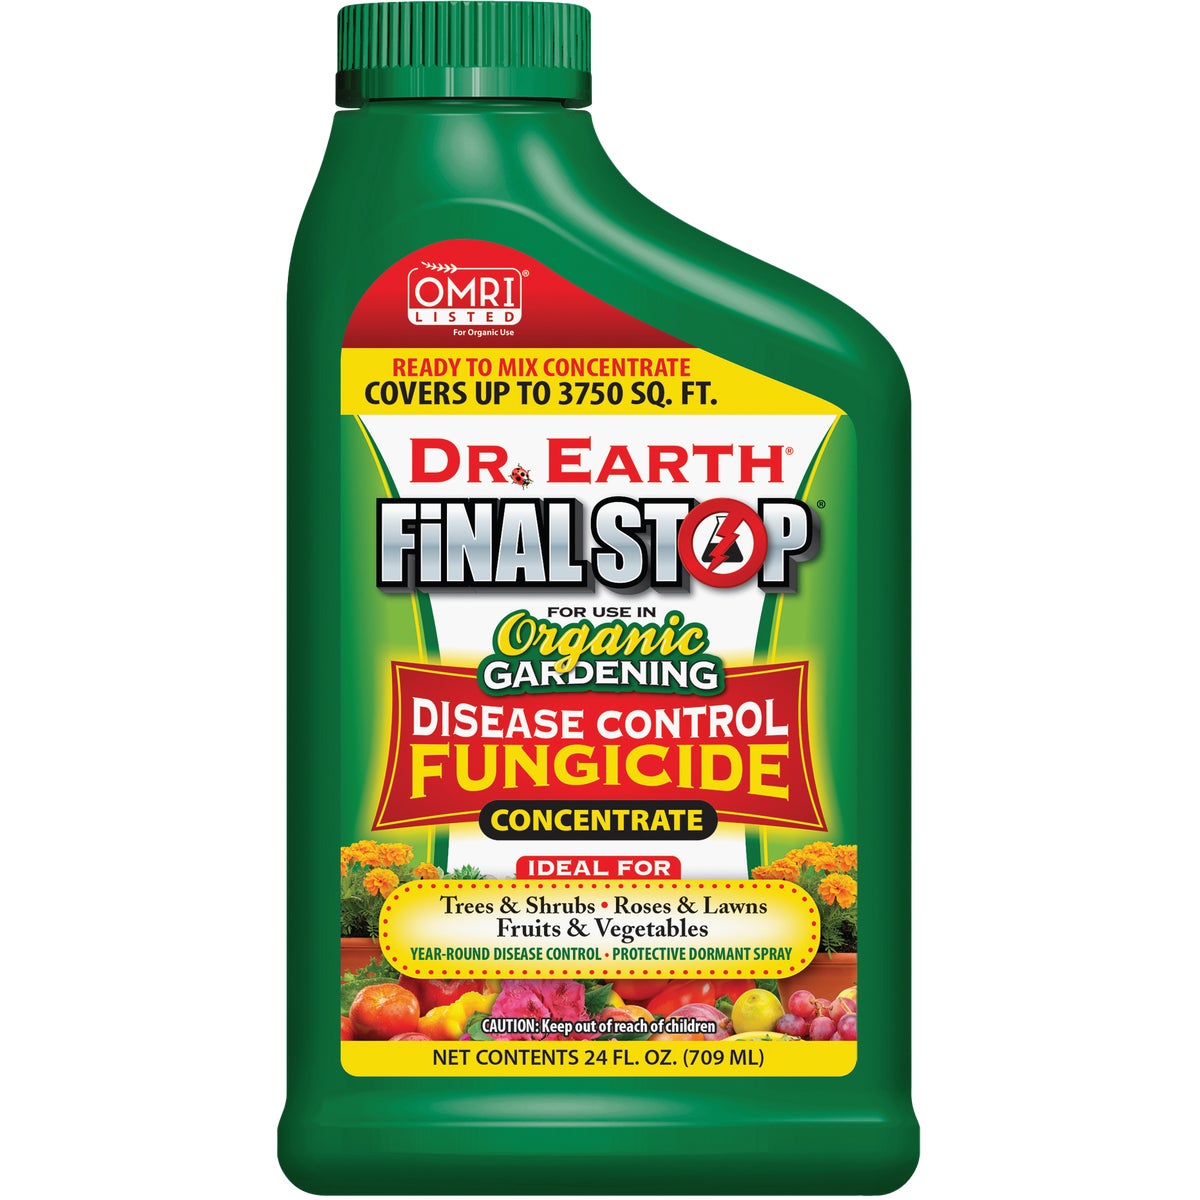 Dr. Earth Final Stop 24 Oz. Concentrate Organic Disease Control Fungicide